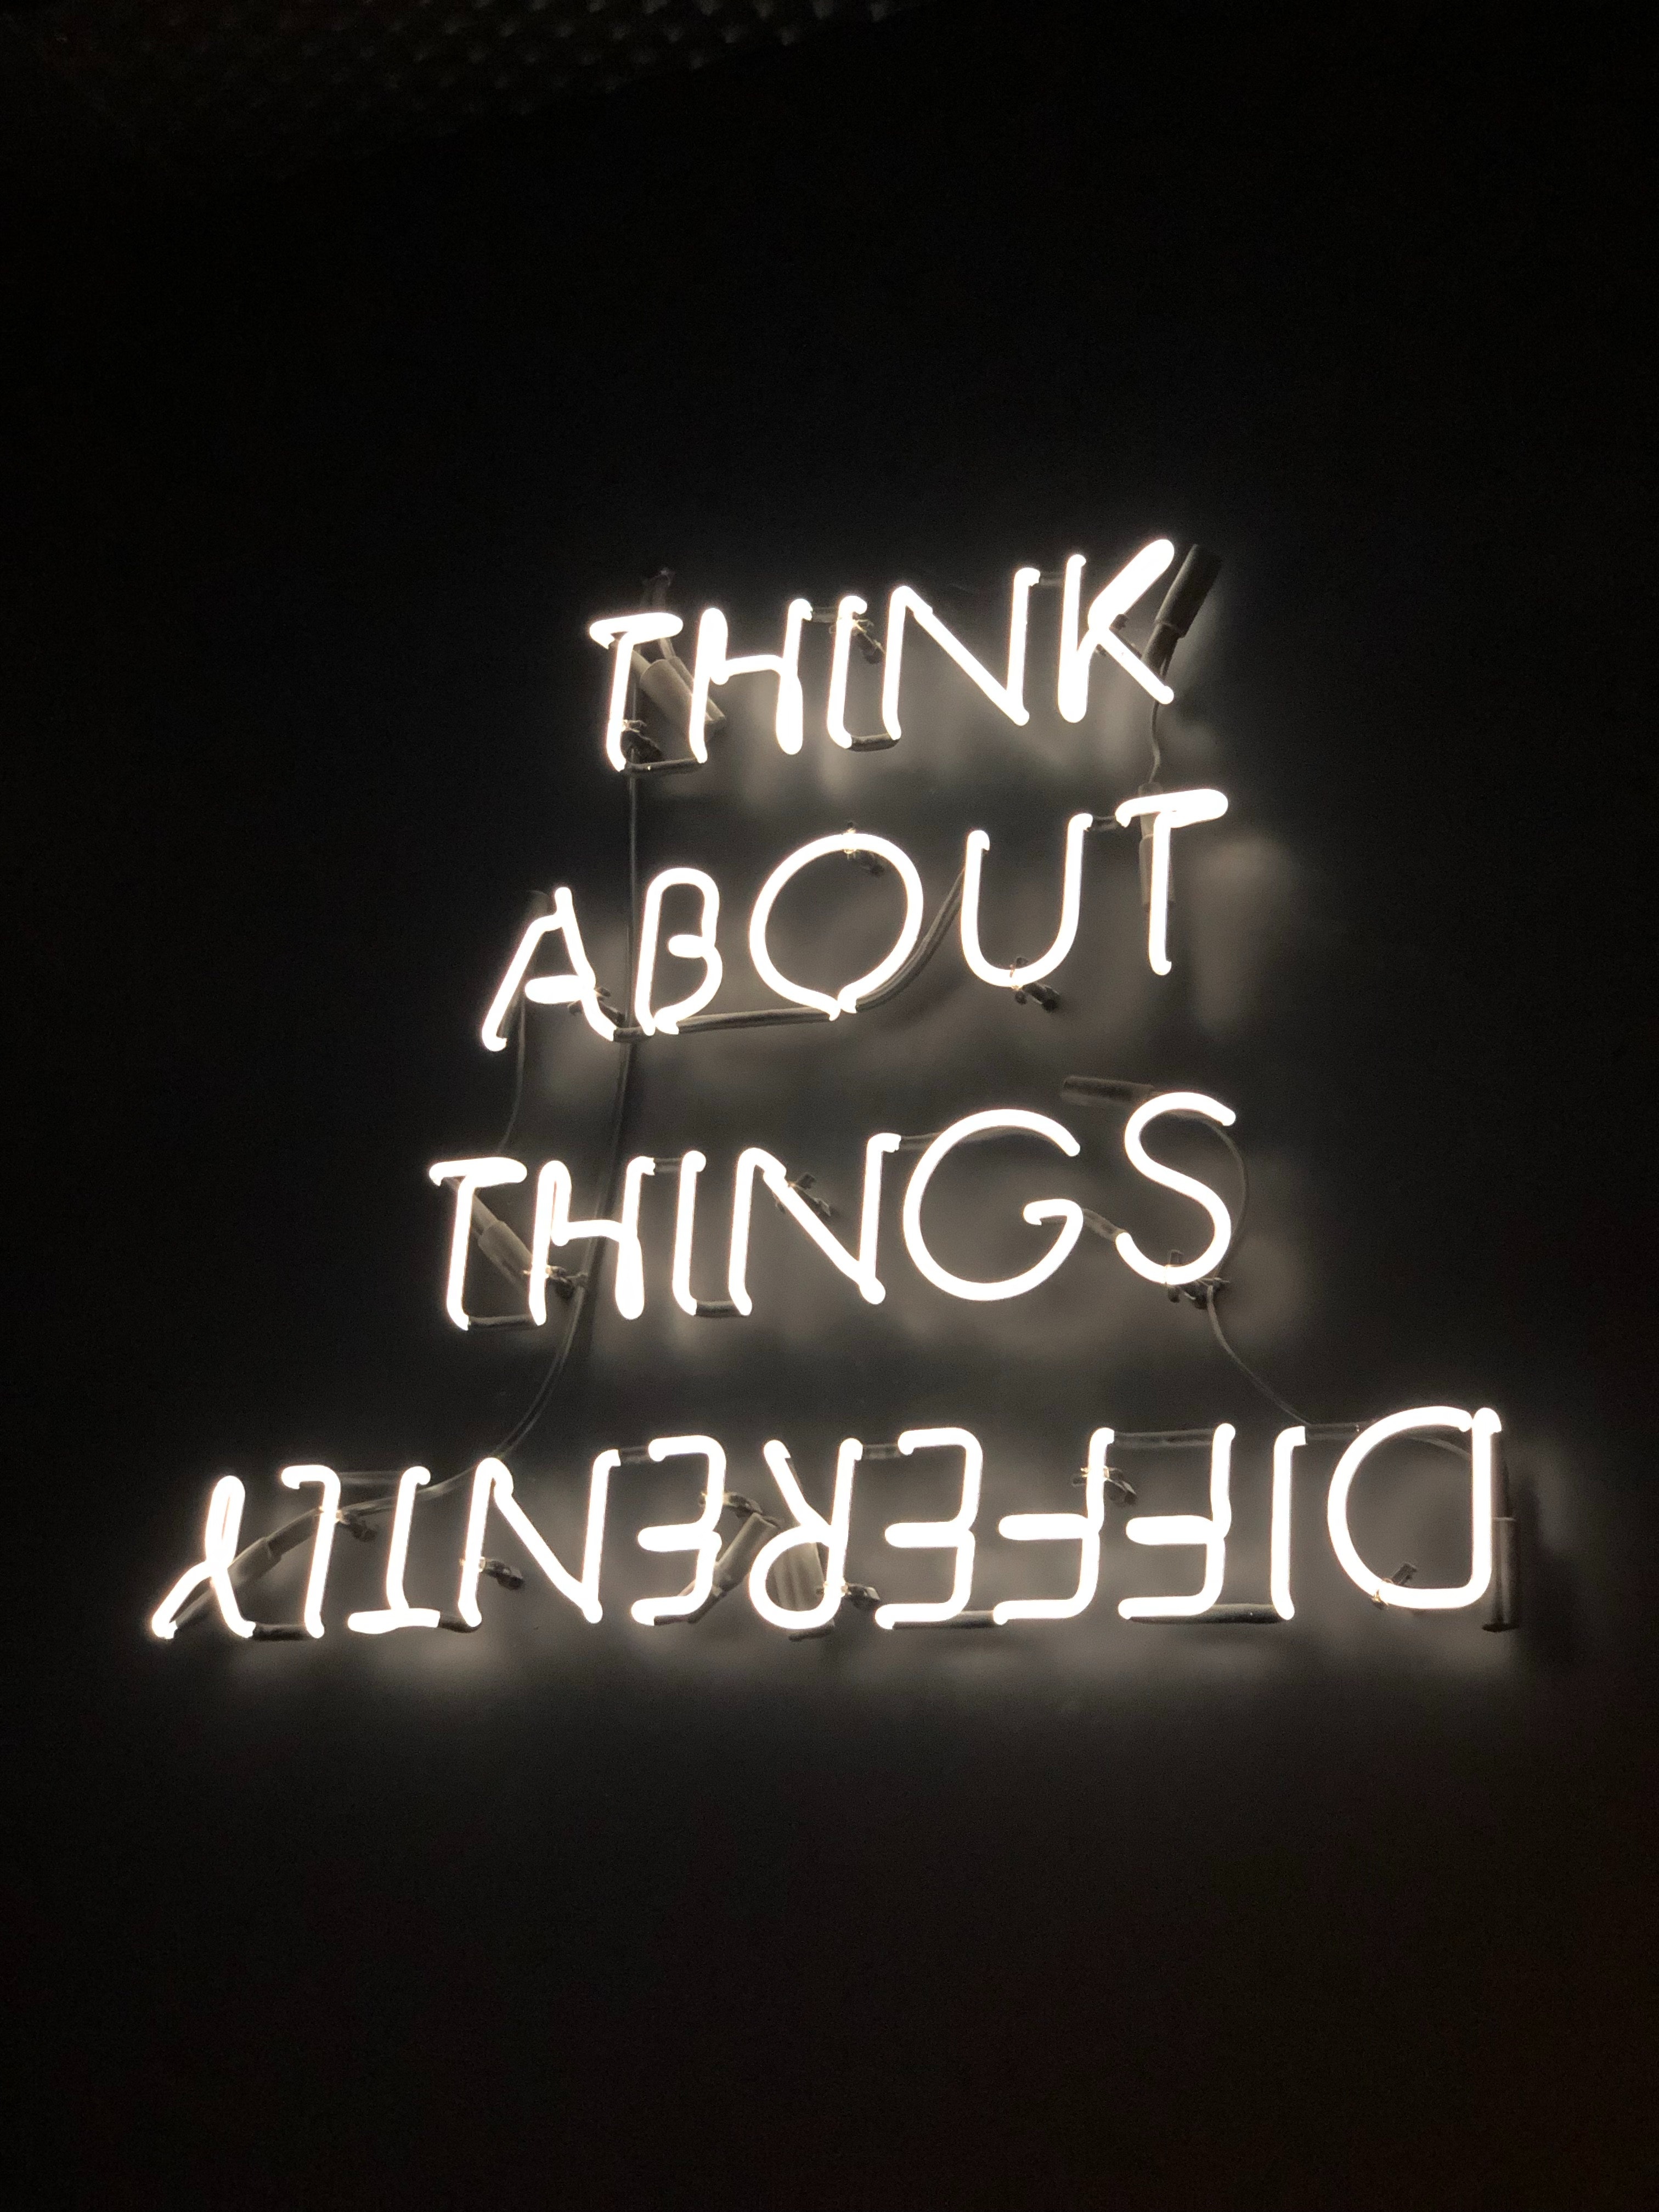 Neon lights which say 'Think about things differently'